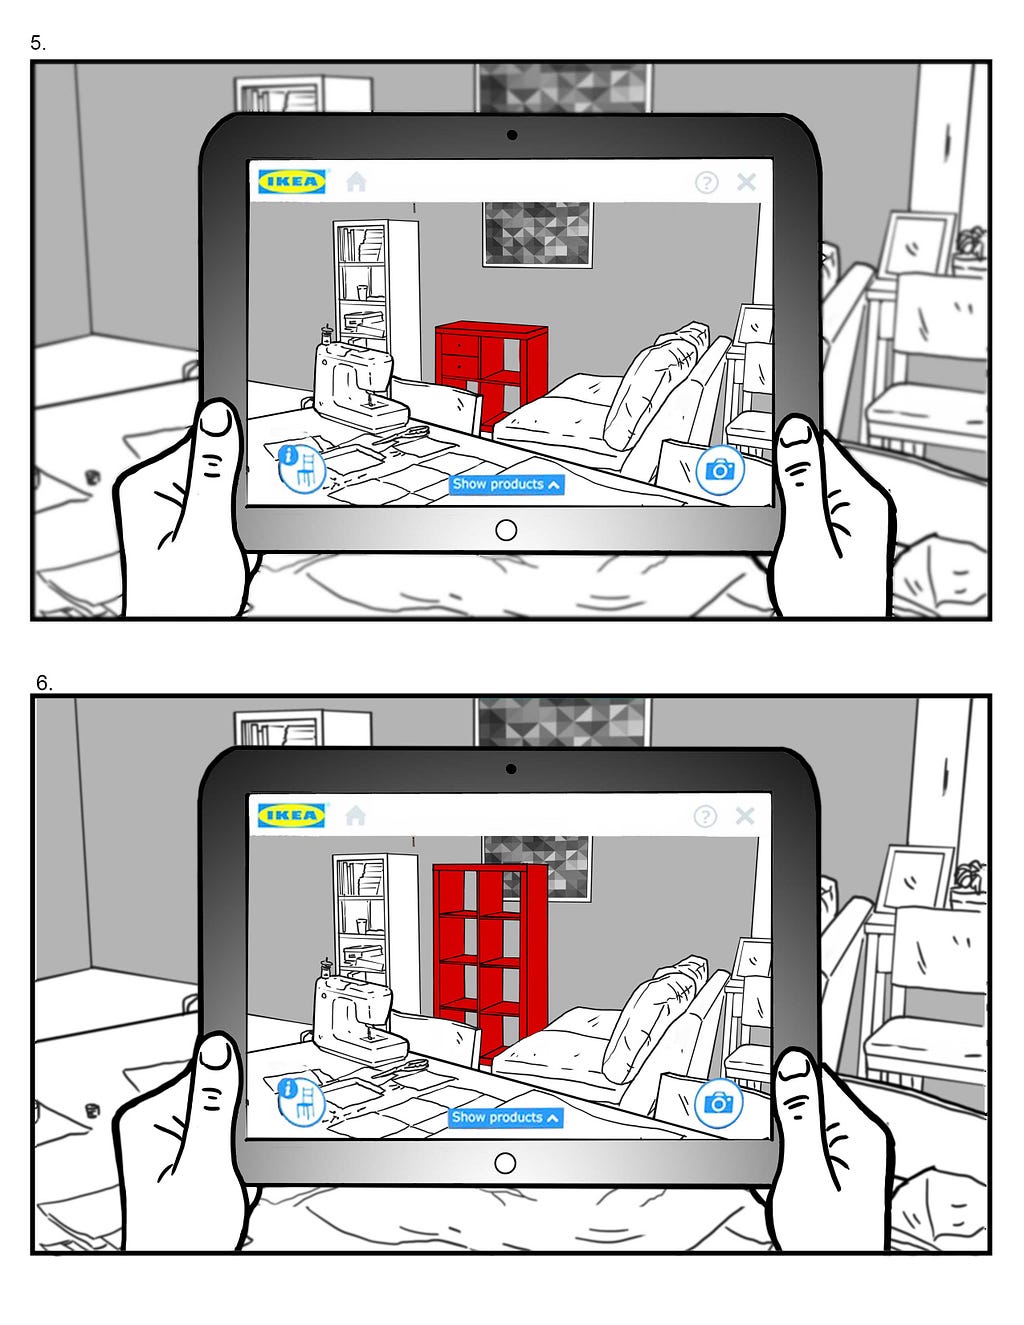 Two panels of a detailed storyboard illustration showing hands holding an iPad. The iPad is using an AR visualization app to show different types of furniture in room.